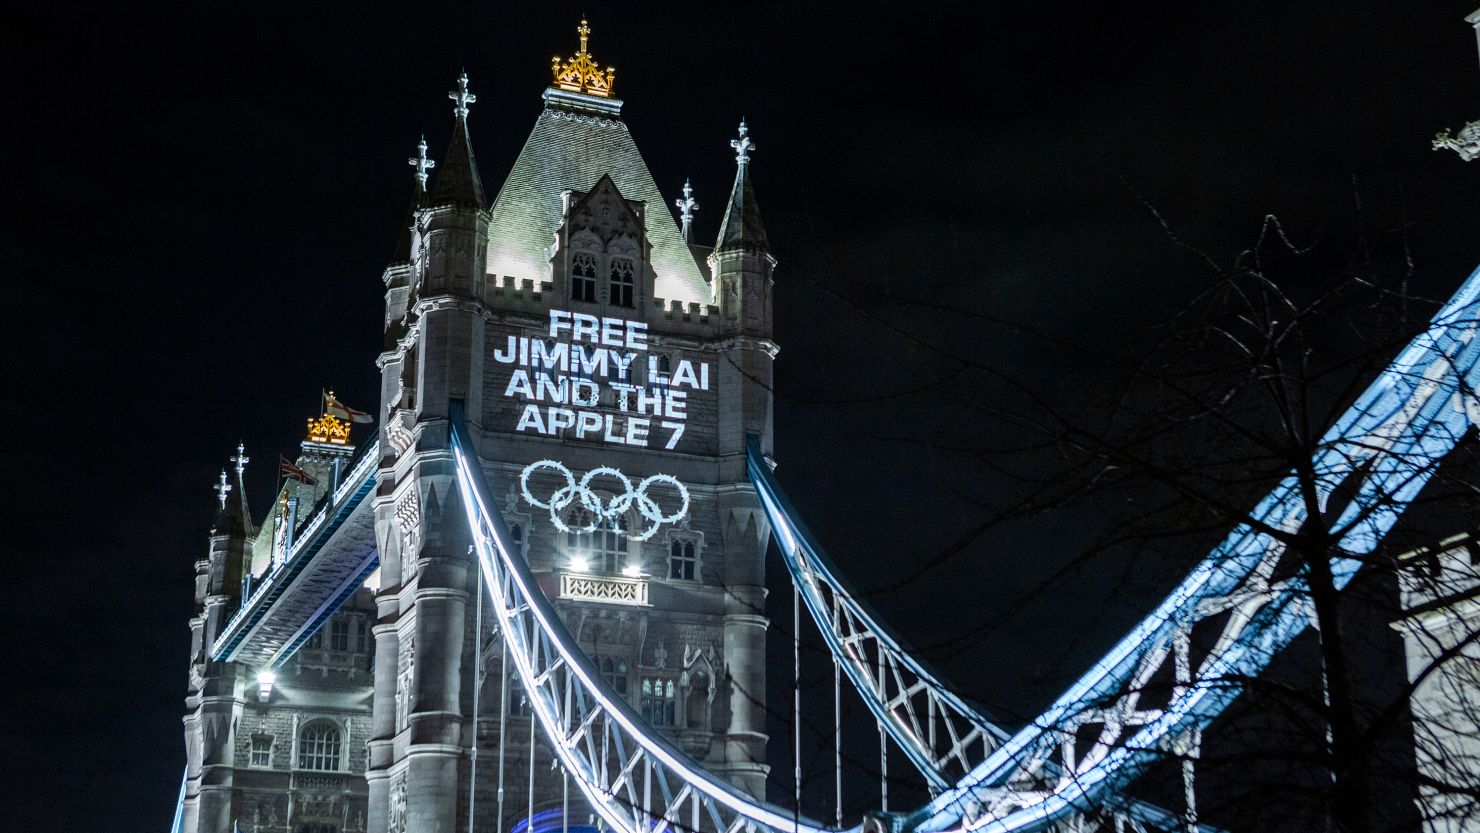 'Committee for Freedom in Hong Kong' project messages on the Tower Bridge in London. 